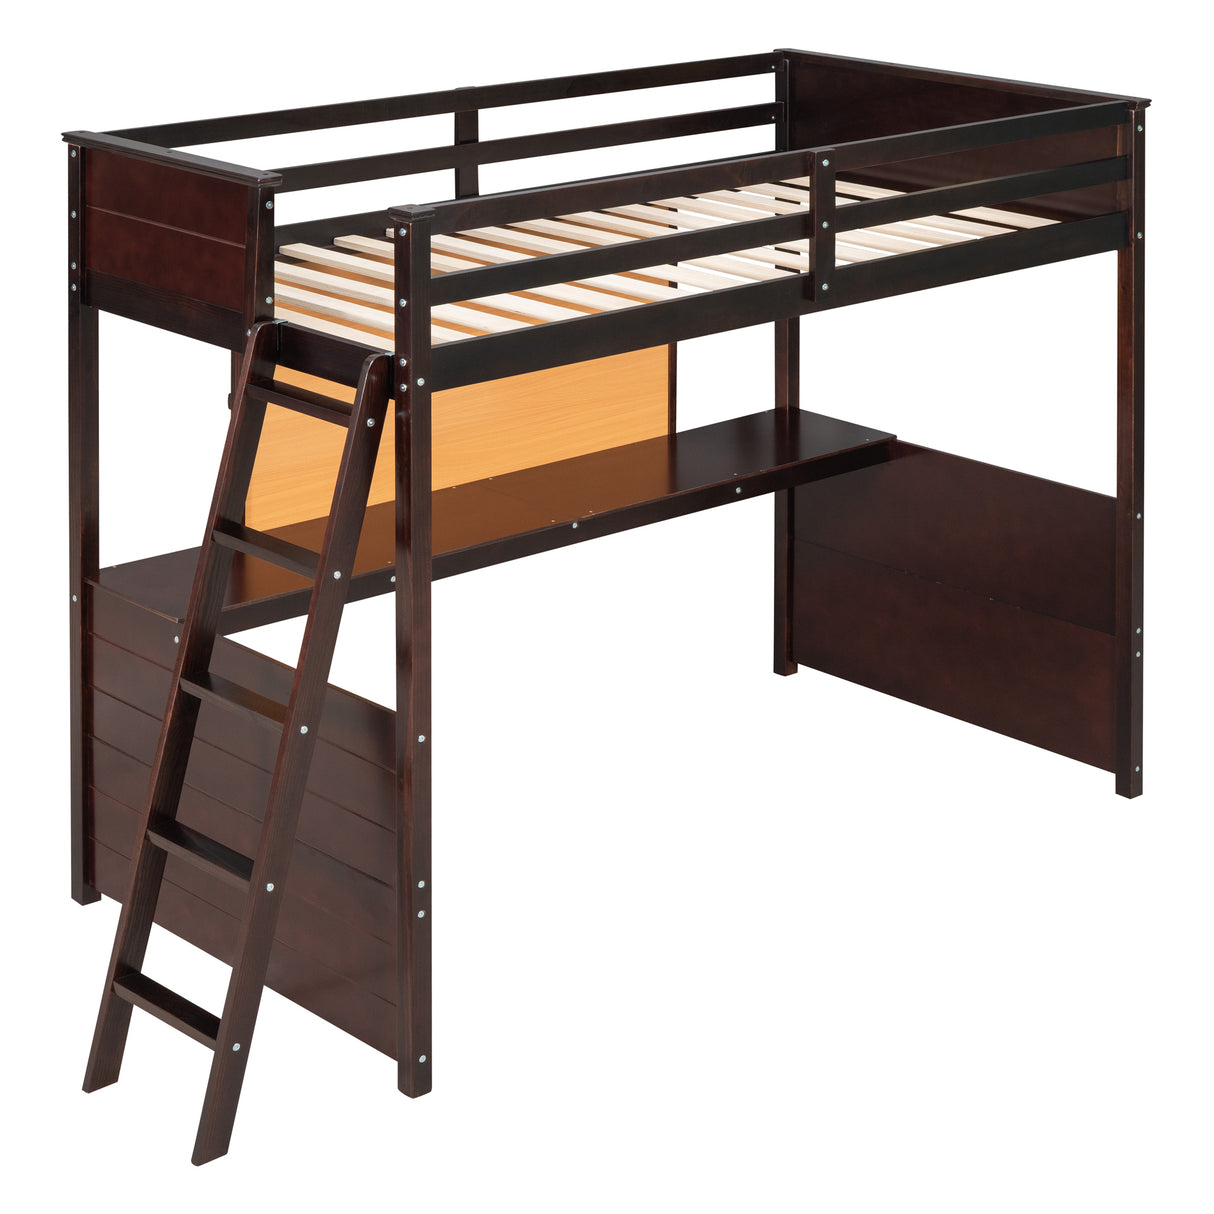 Twin size Loft Bed with Desk and Writing Board, Wooden Loft Bed with Desk - Espresso - Home Elegance USA